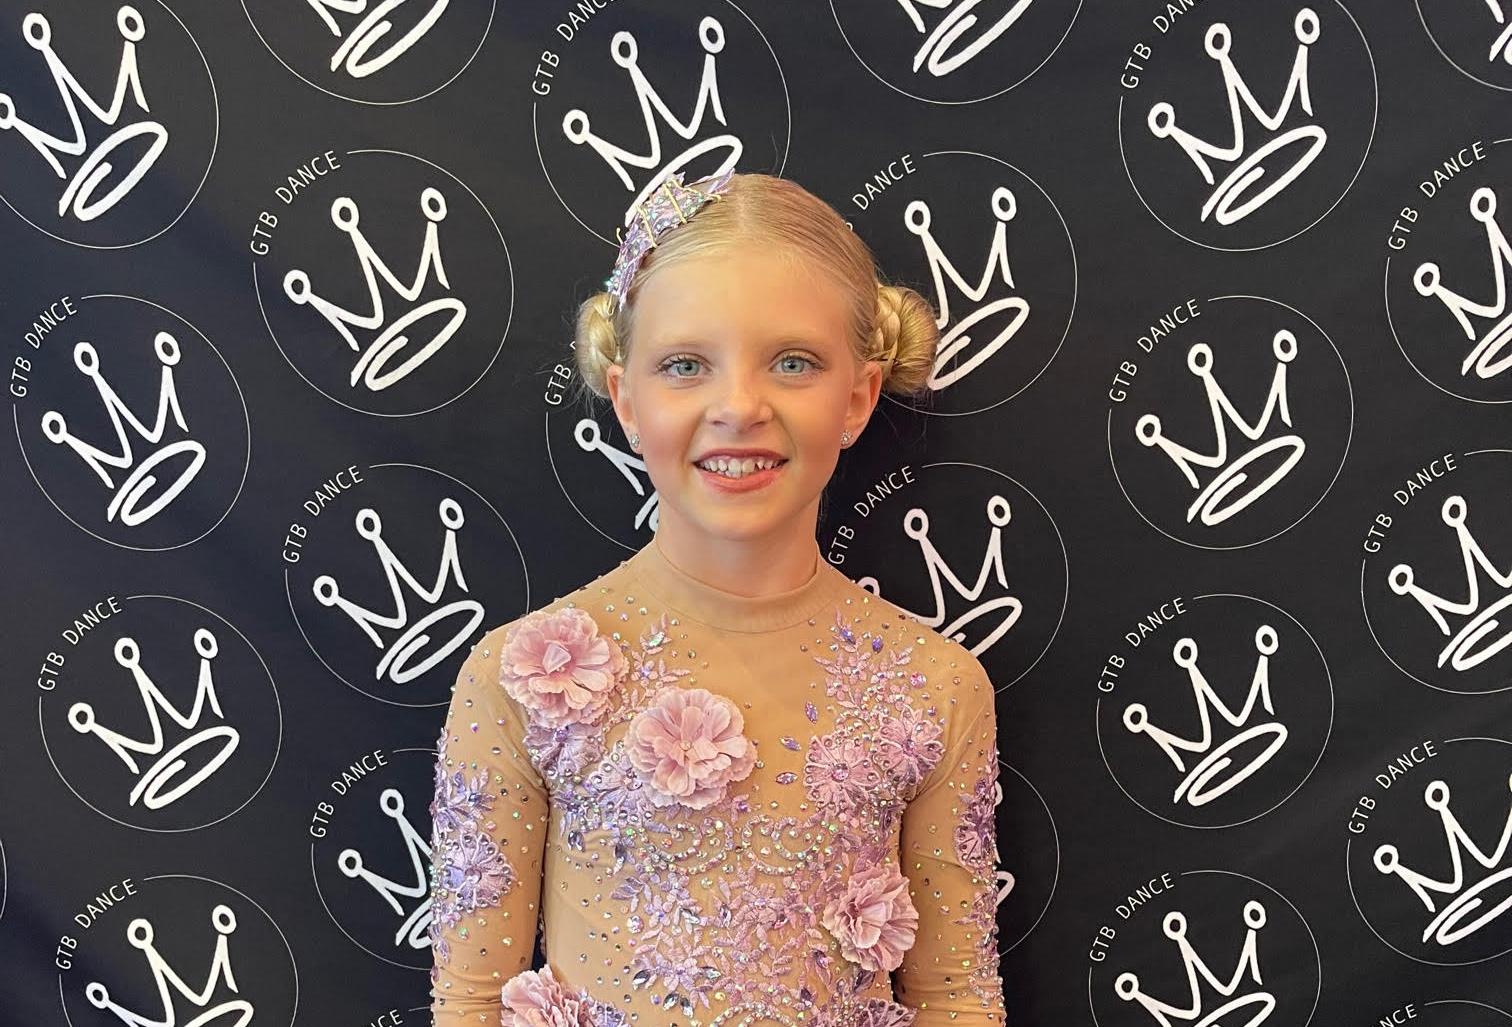 Zahra Cawley brought home dance honours. Photo credit: Kim Cawley